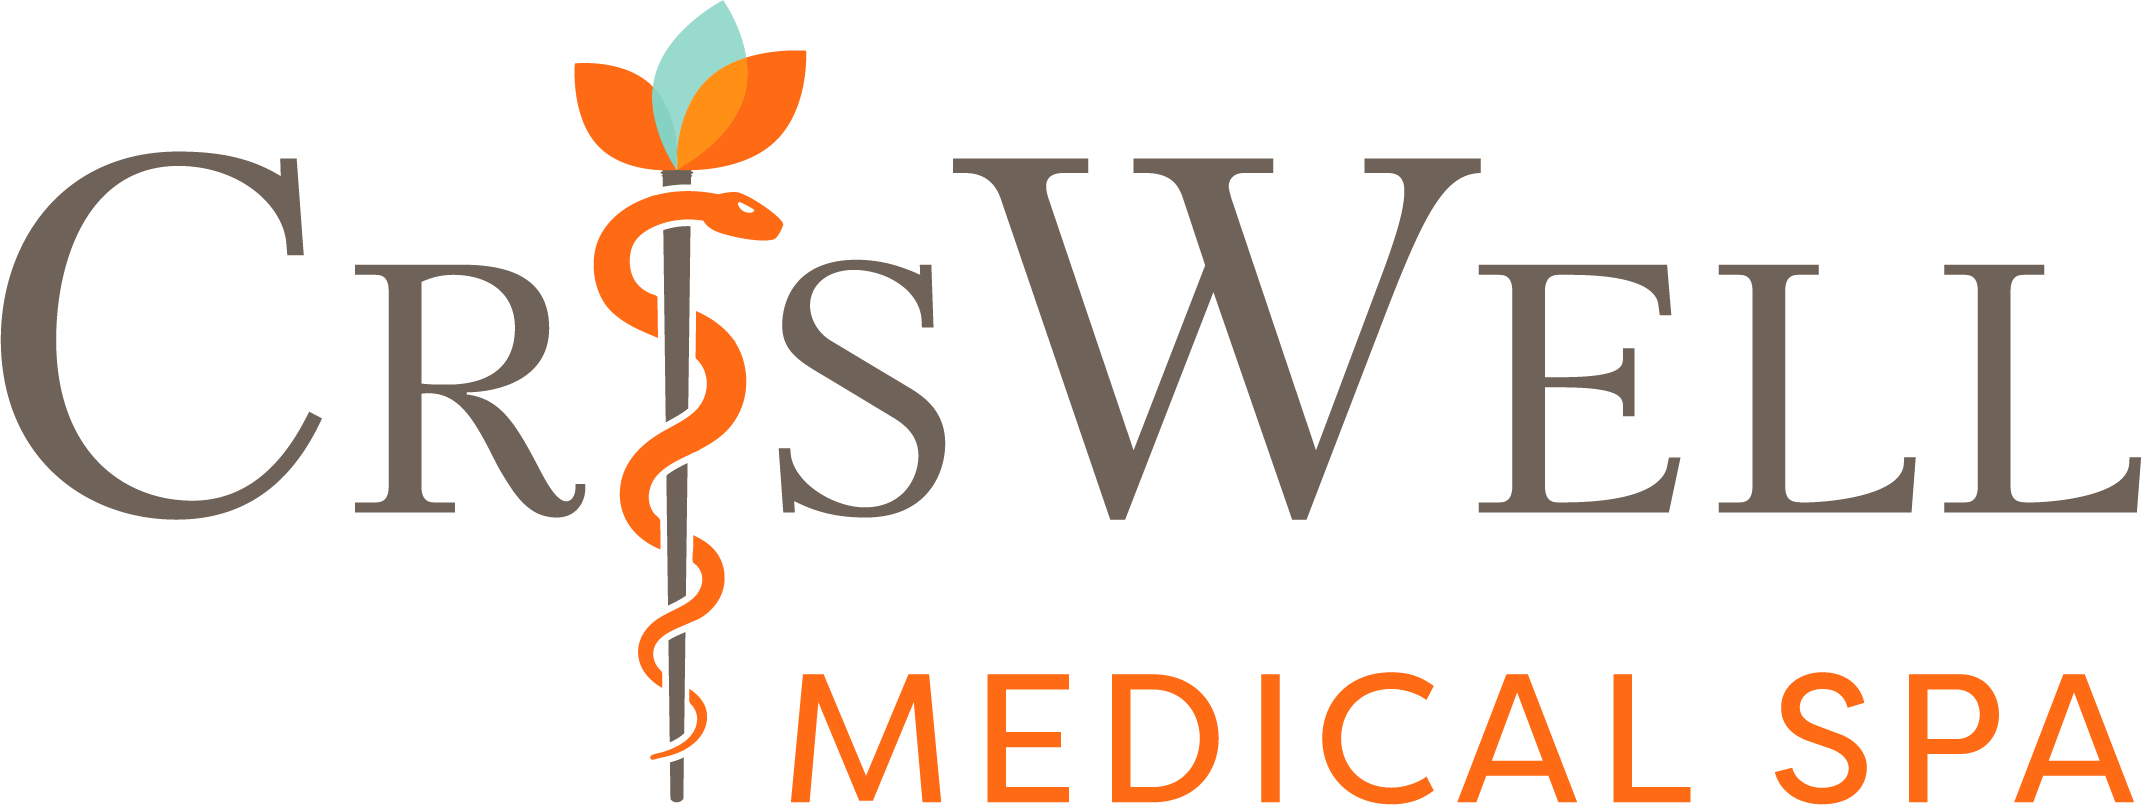 CrisWell_Logo